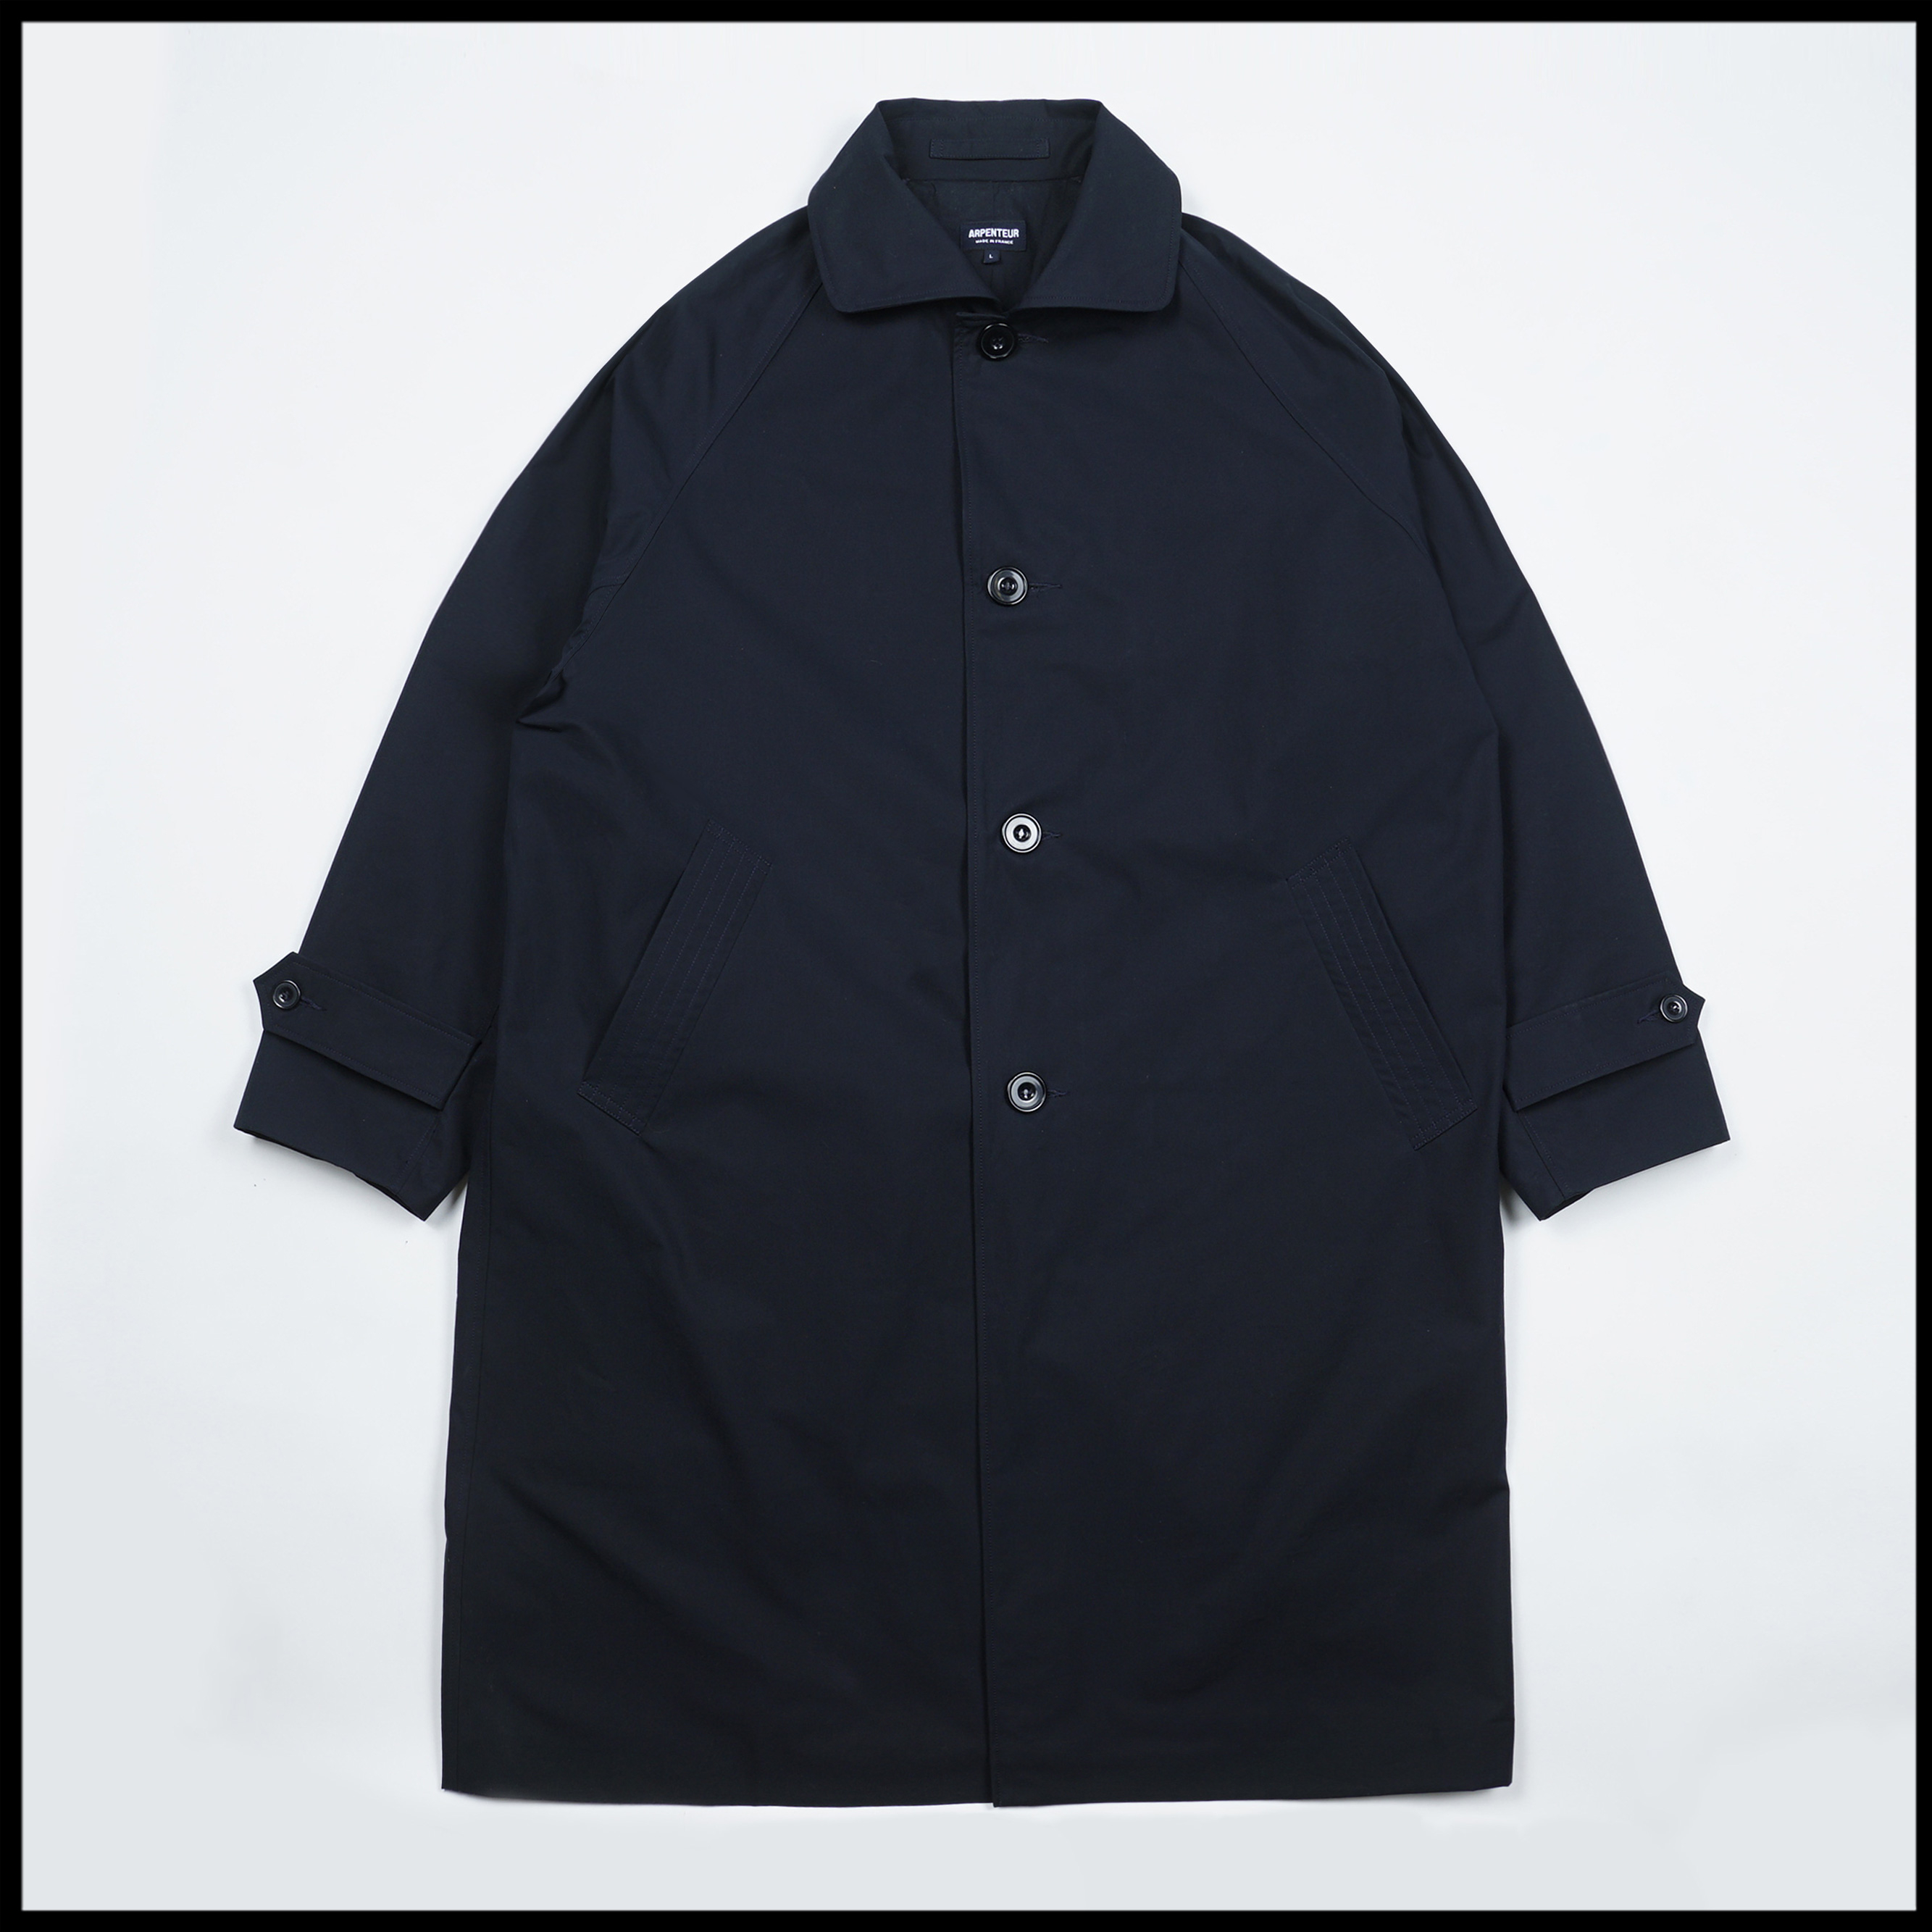 UTILE overcoat in Midnight blue color by Arpenteur